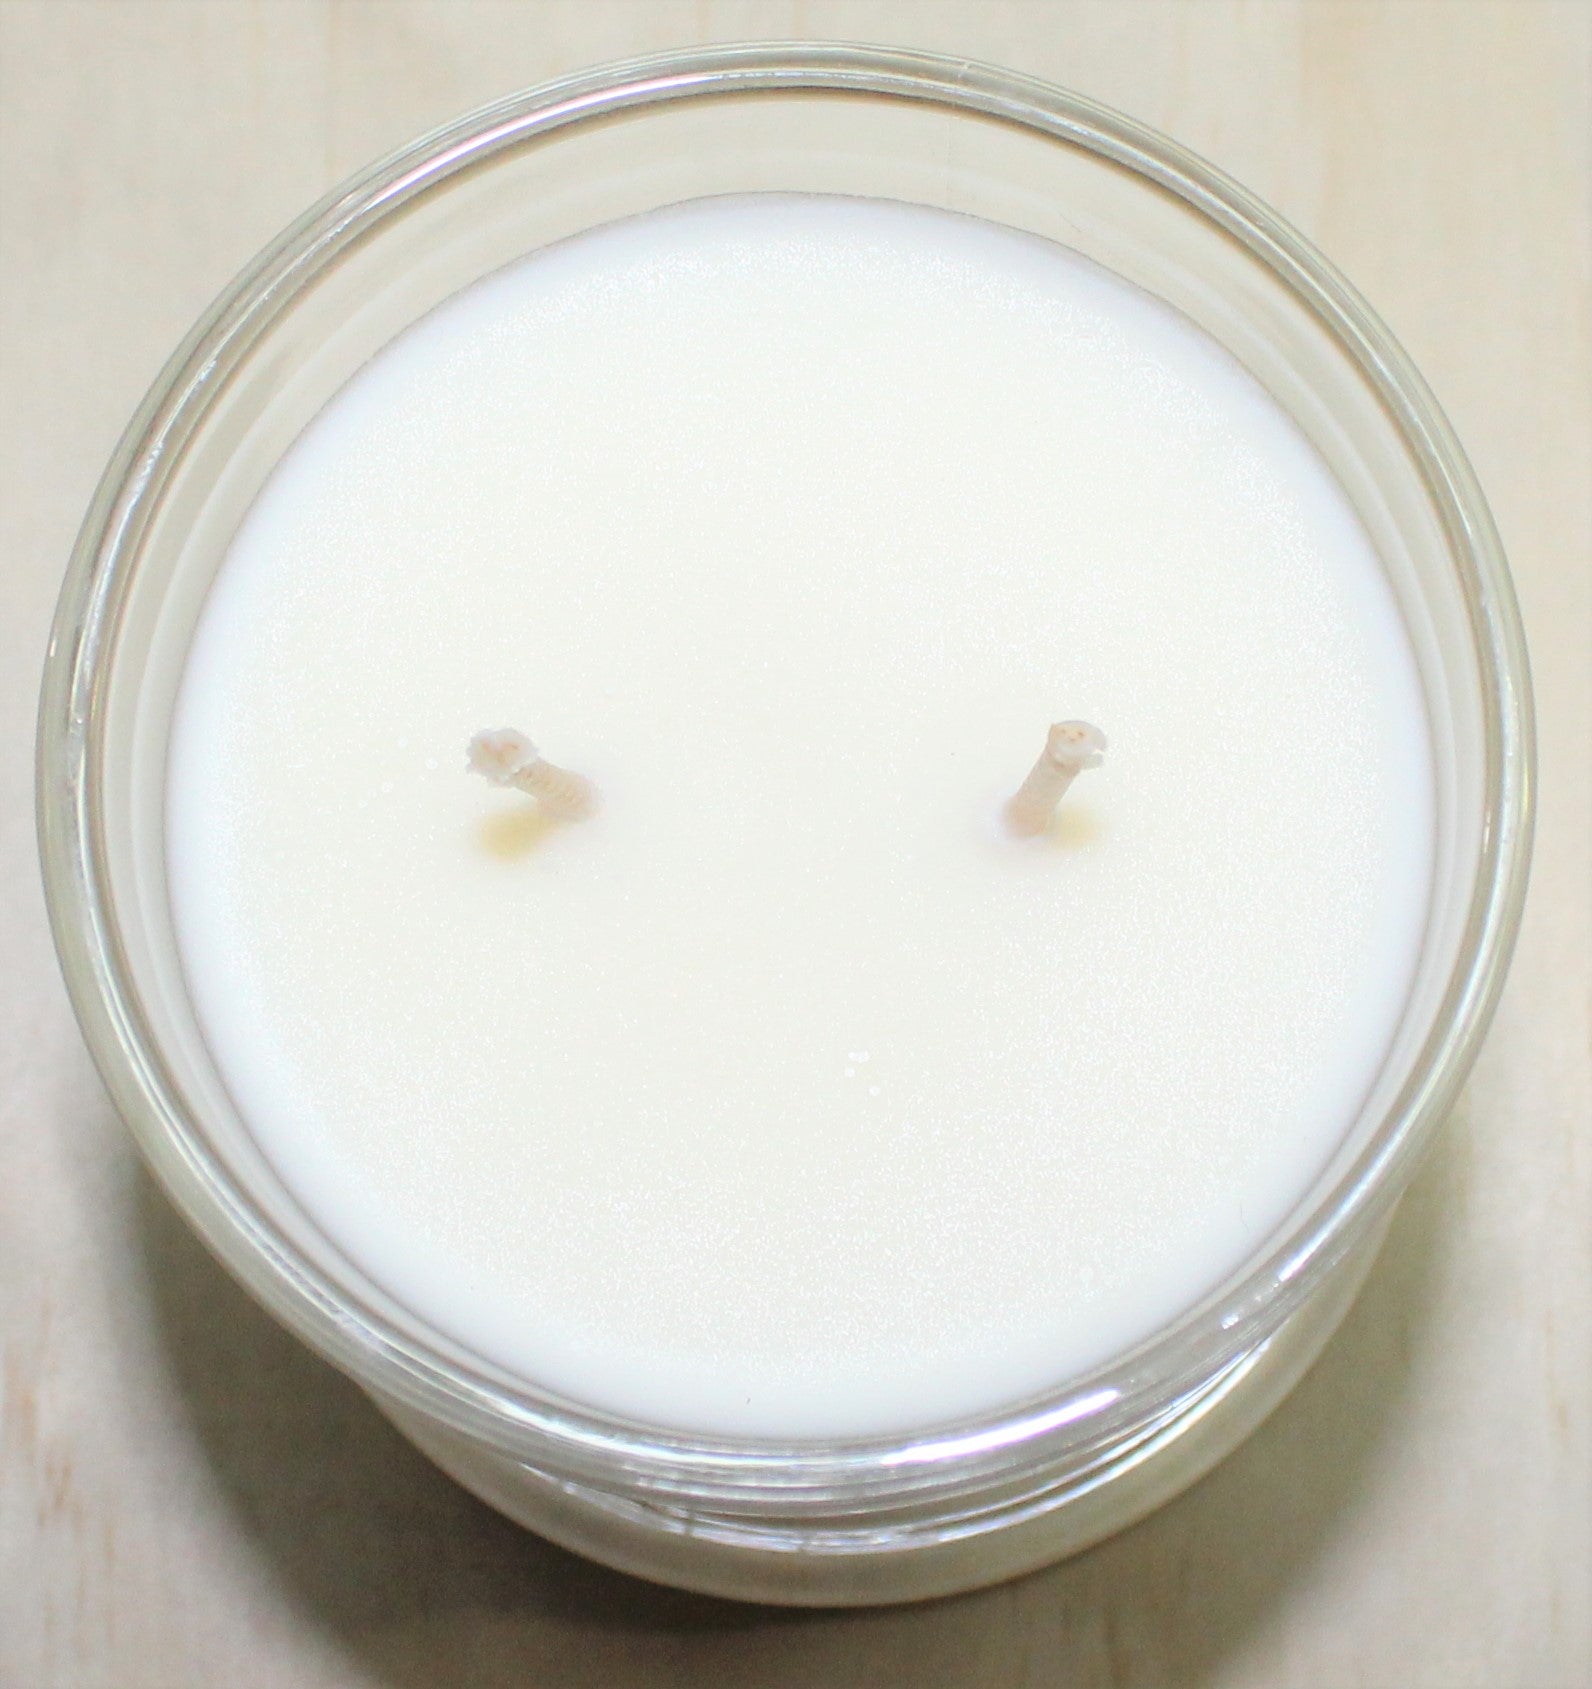 Vanilla Cove Soy Candle 50 hour Nag Champa Fragrance in clear glass jar image shows 2 wicks